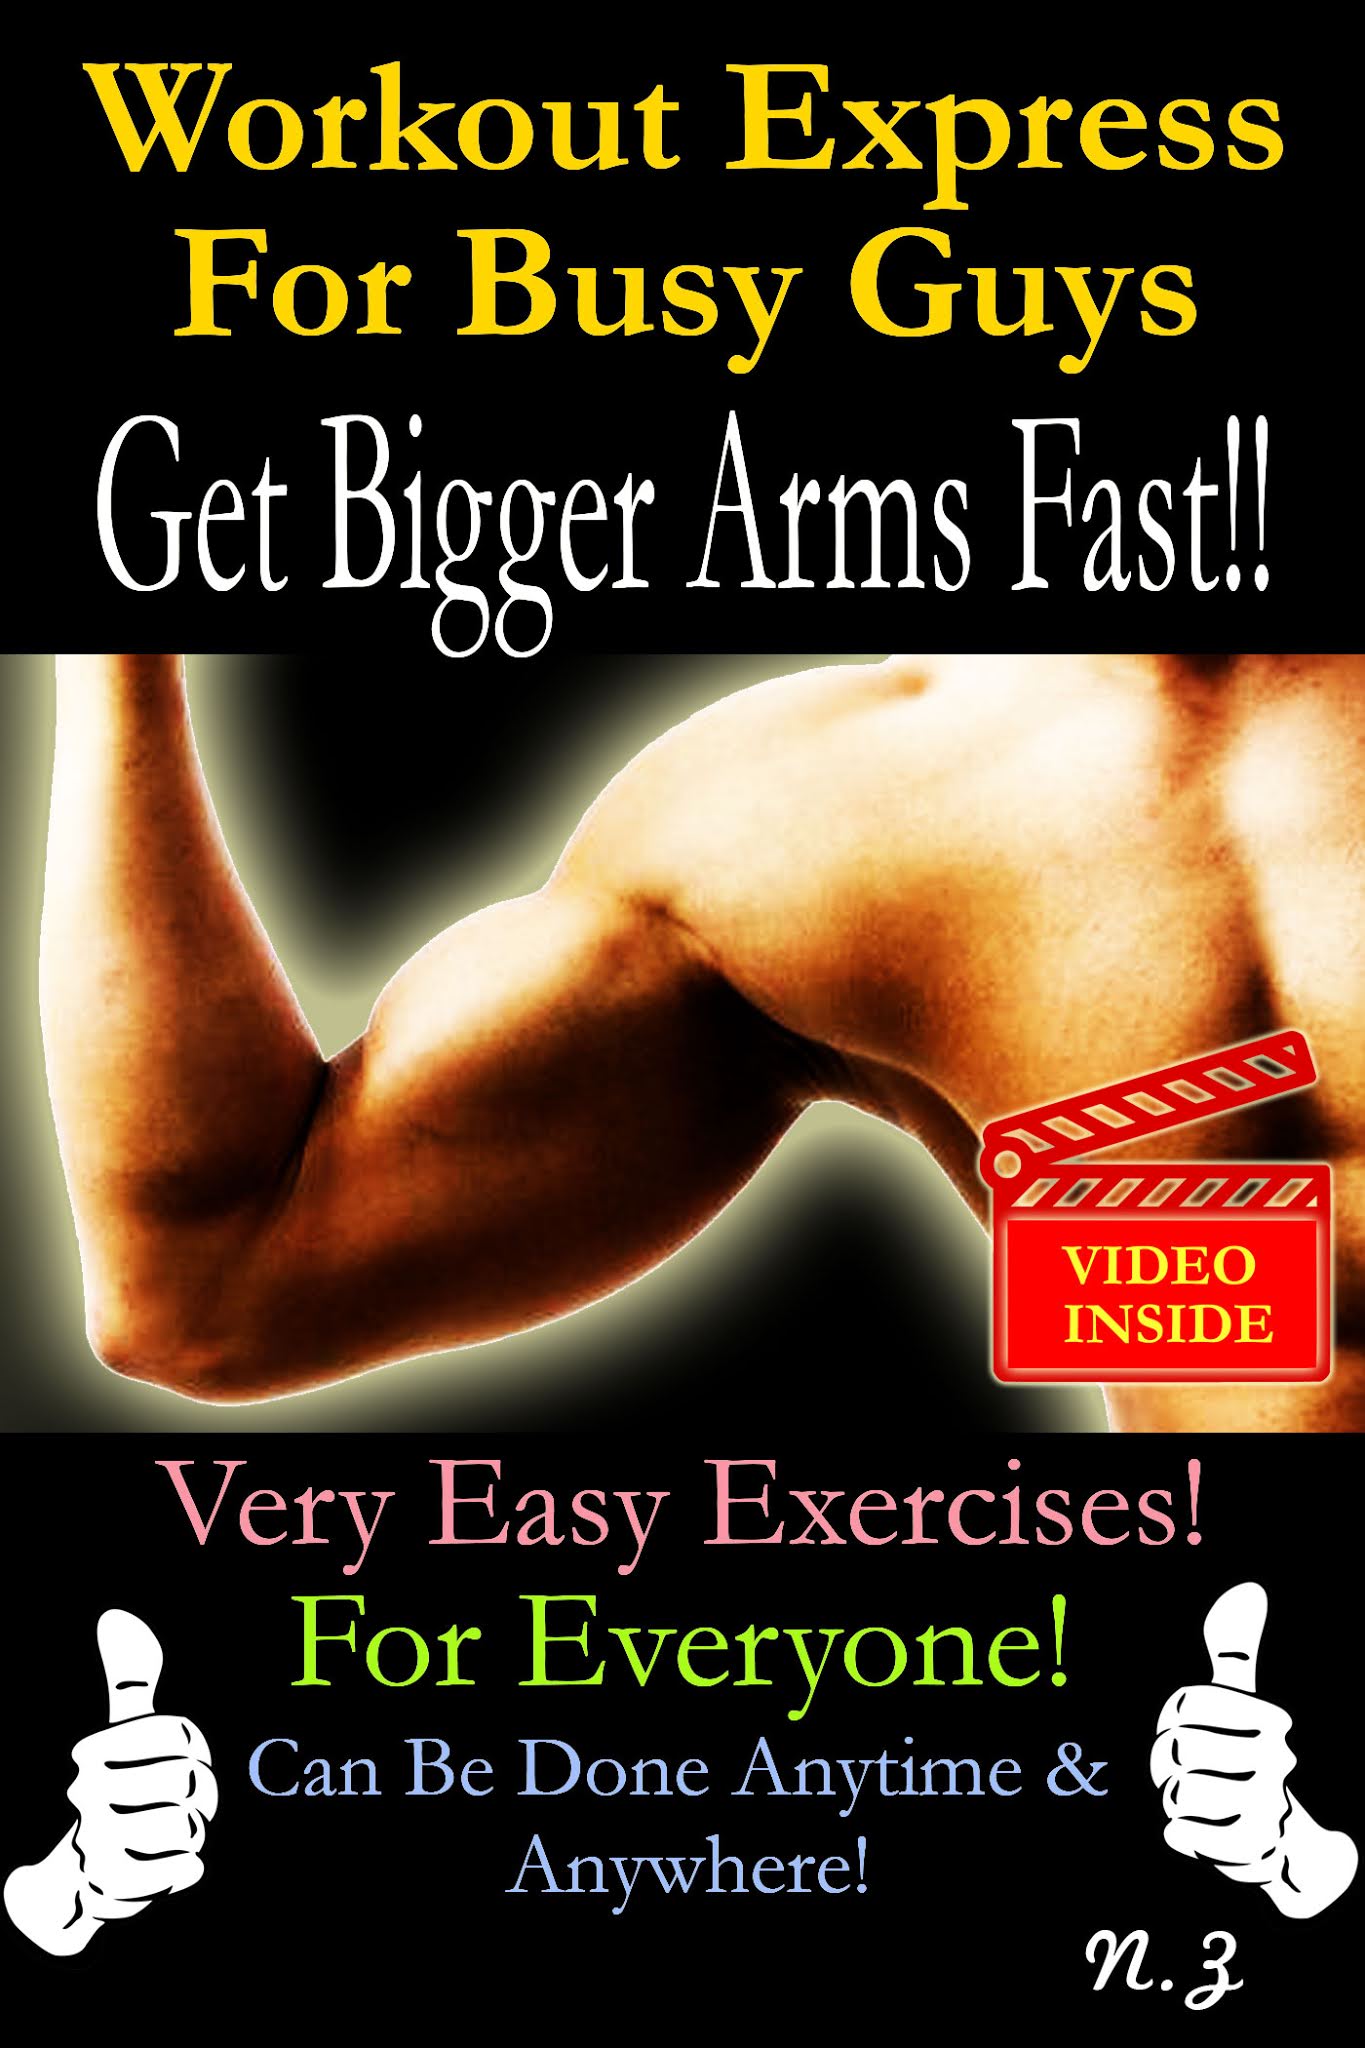 Workout Express For Busy Guys: Get Bigger Arms Fast!!